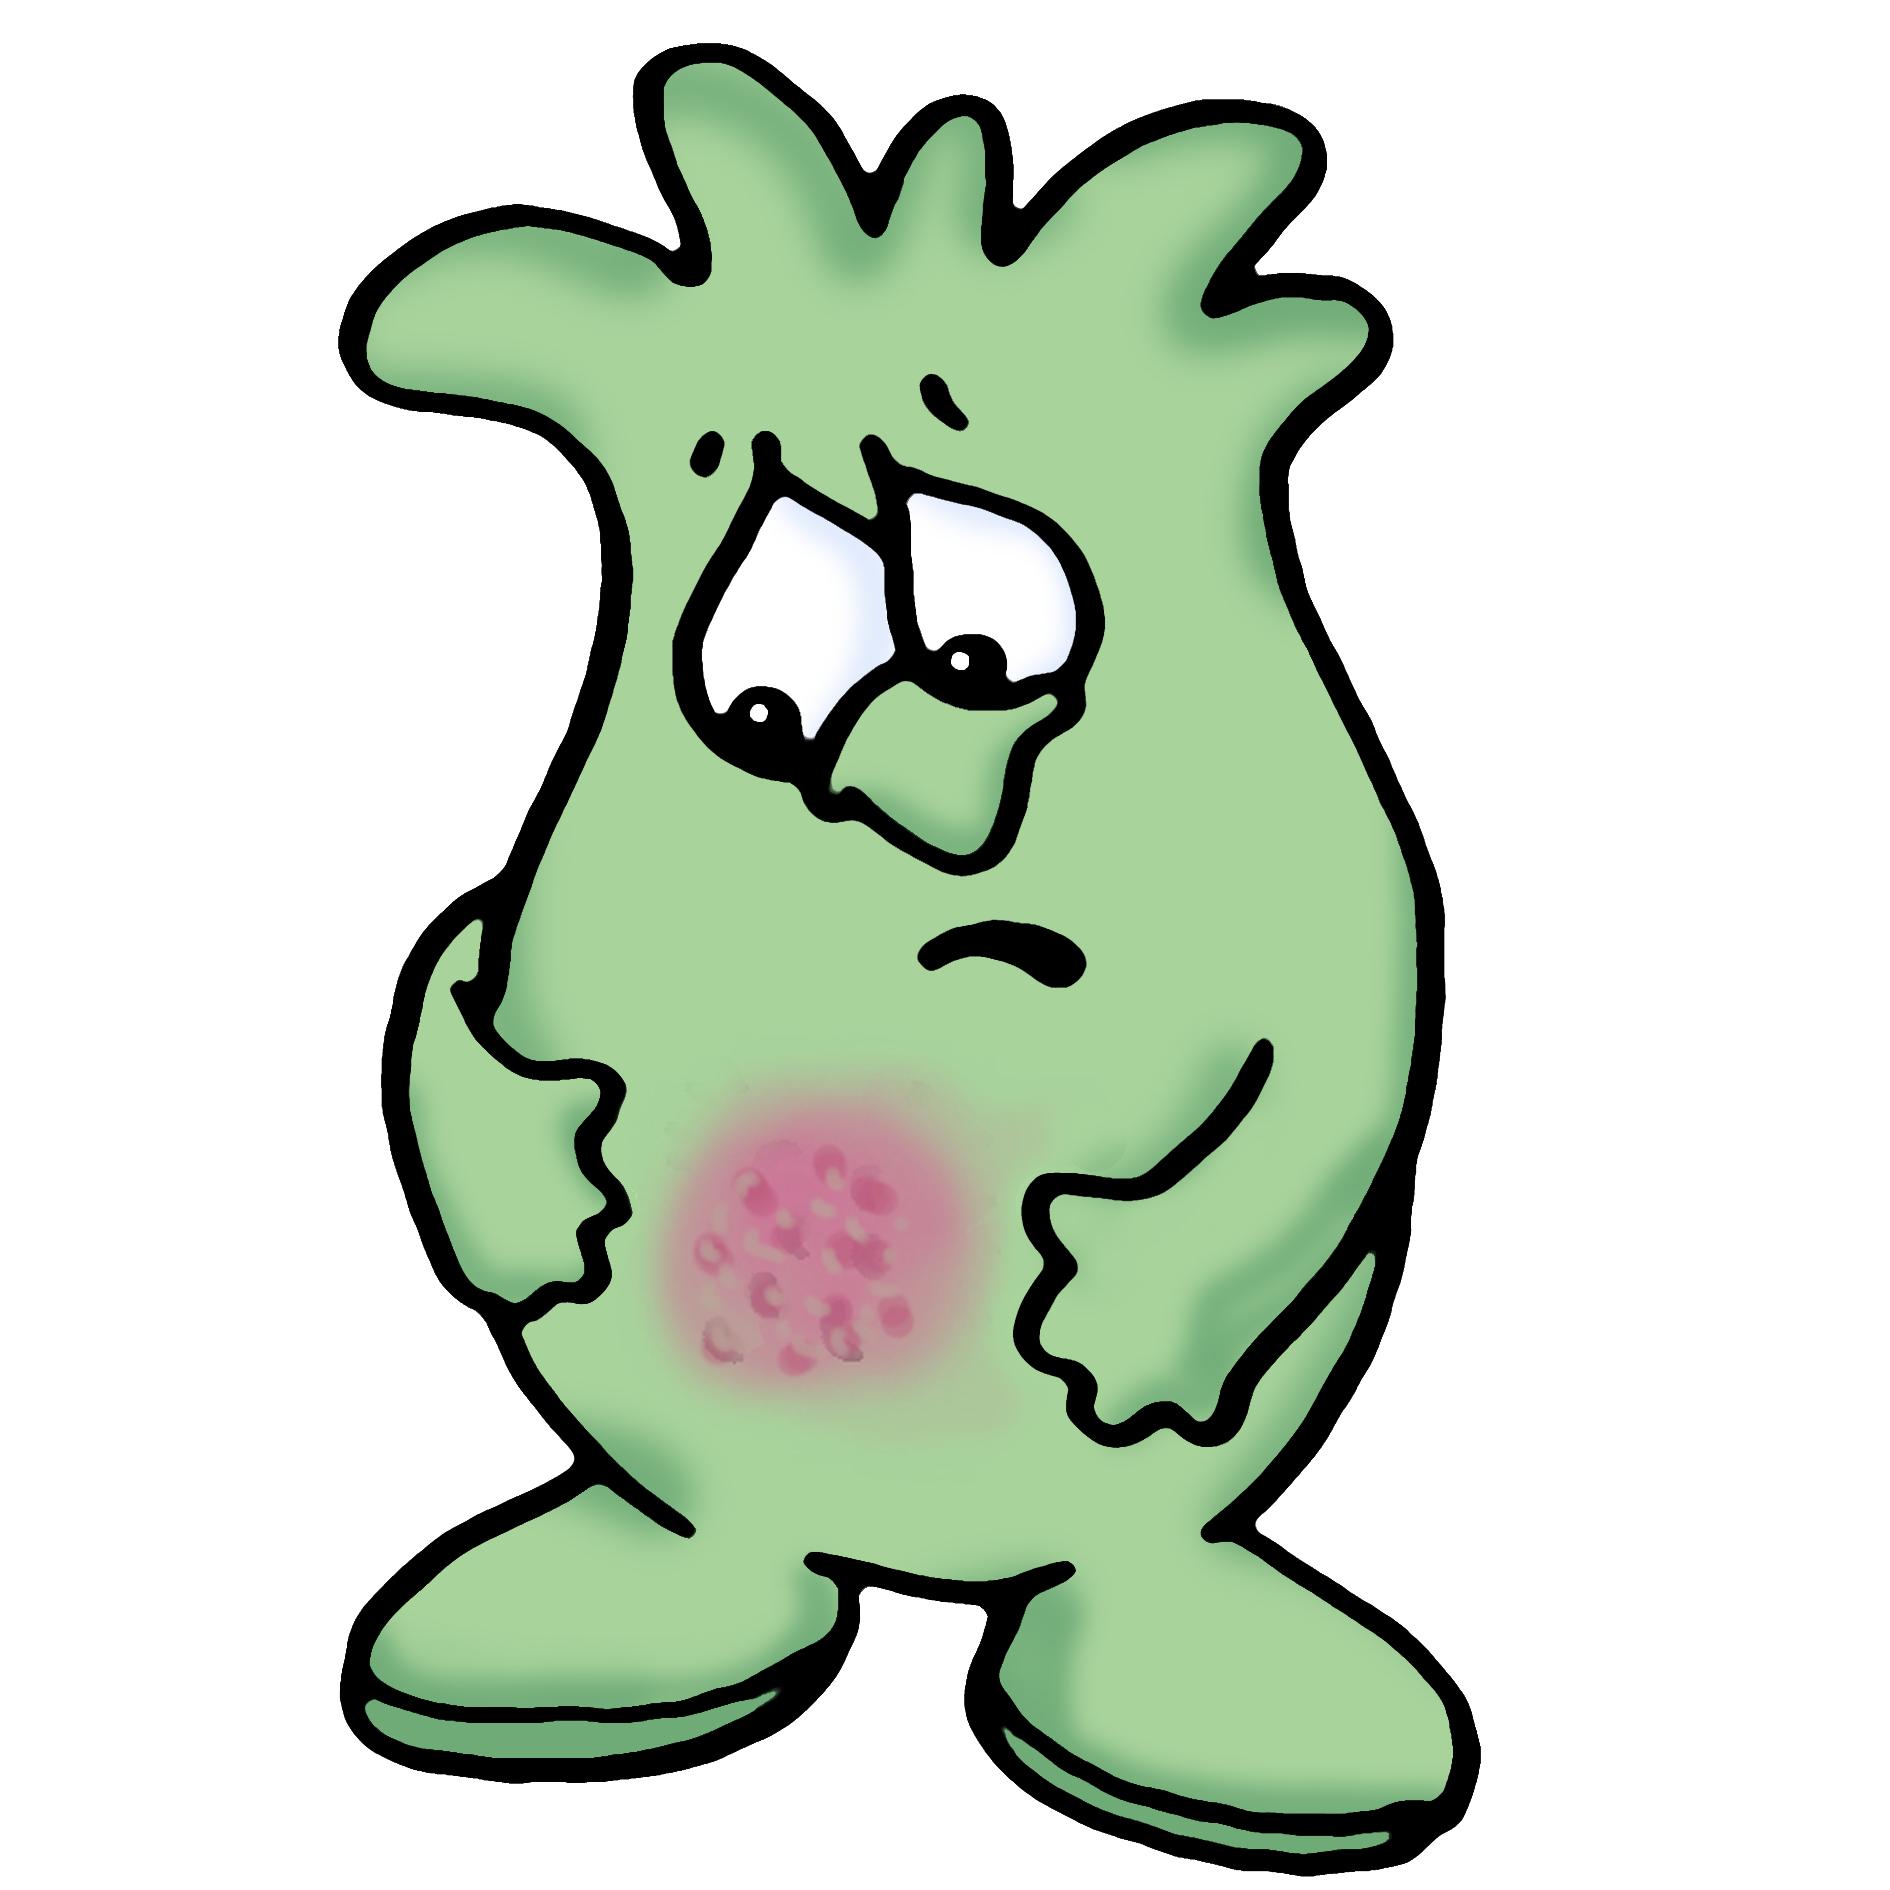 germs clipart infected